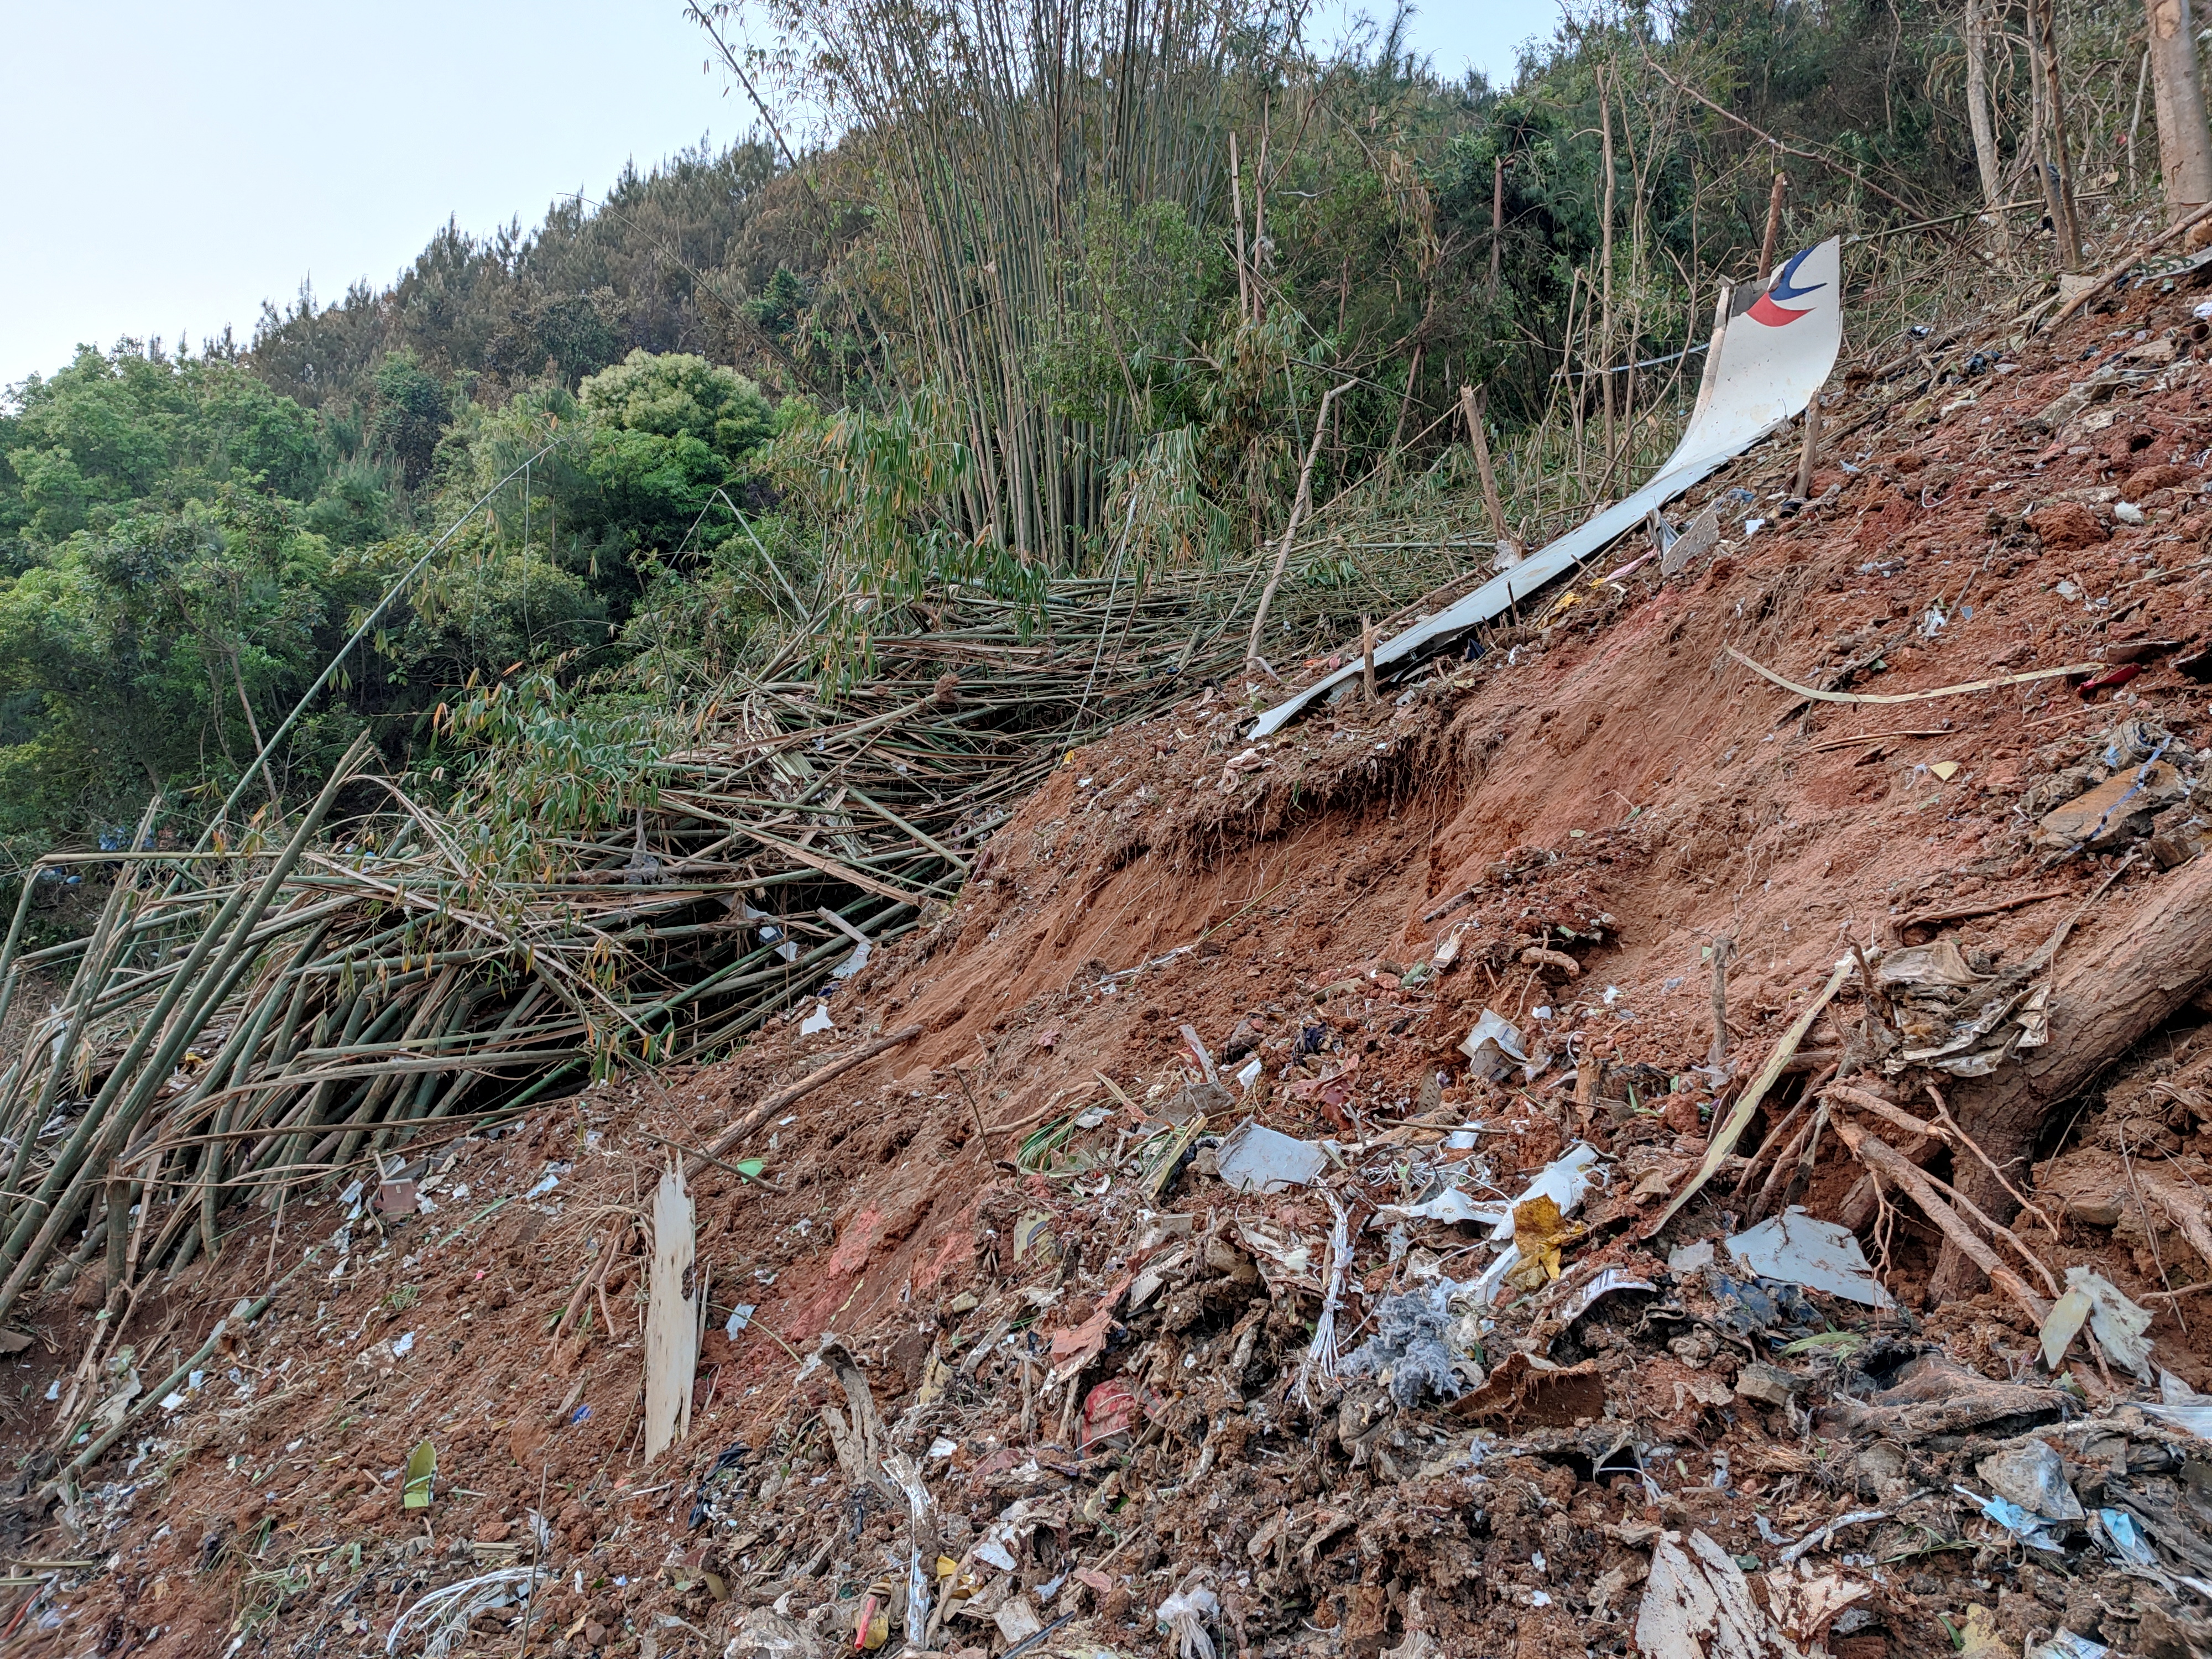 Plane debris is seen at the site where a China Eastern Airlines Boeing 737-800 plane crashed, in Wuzhou